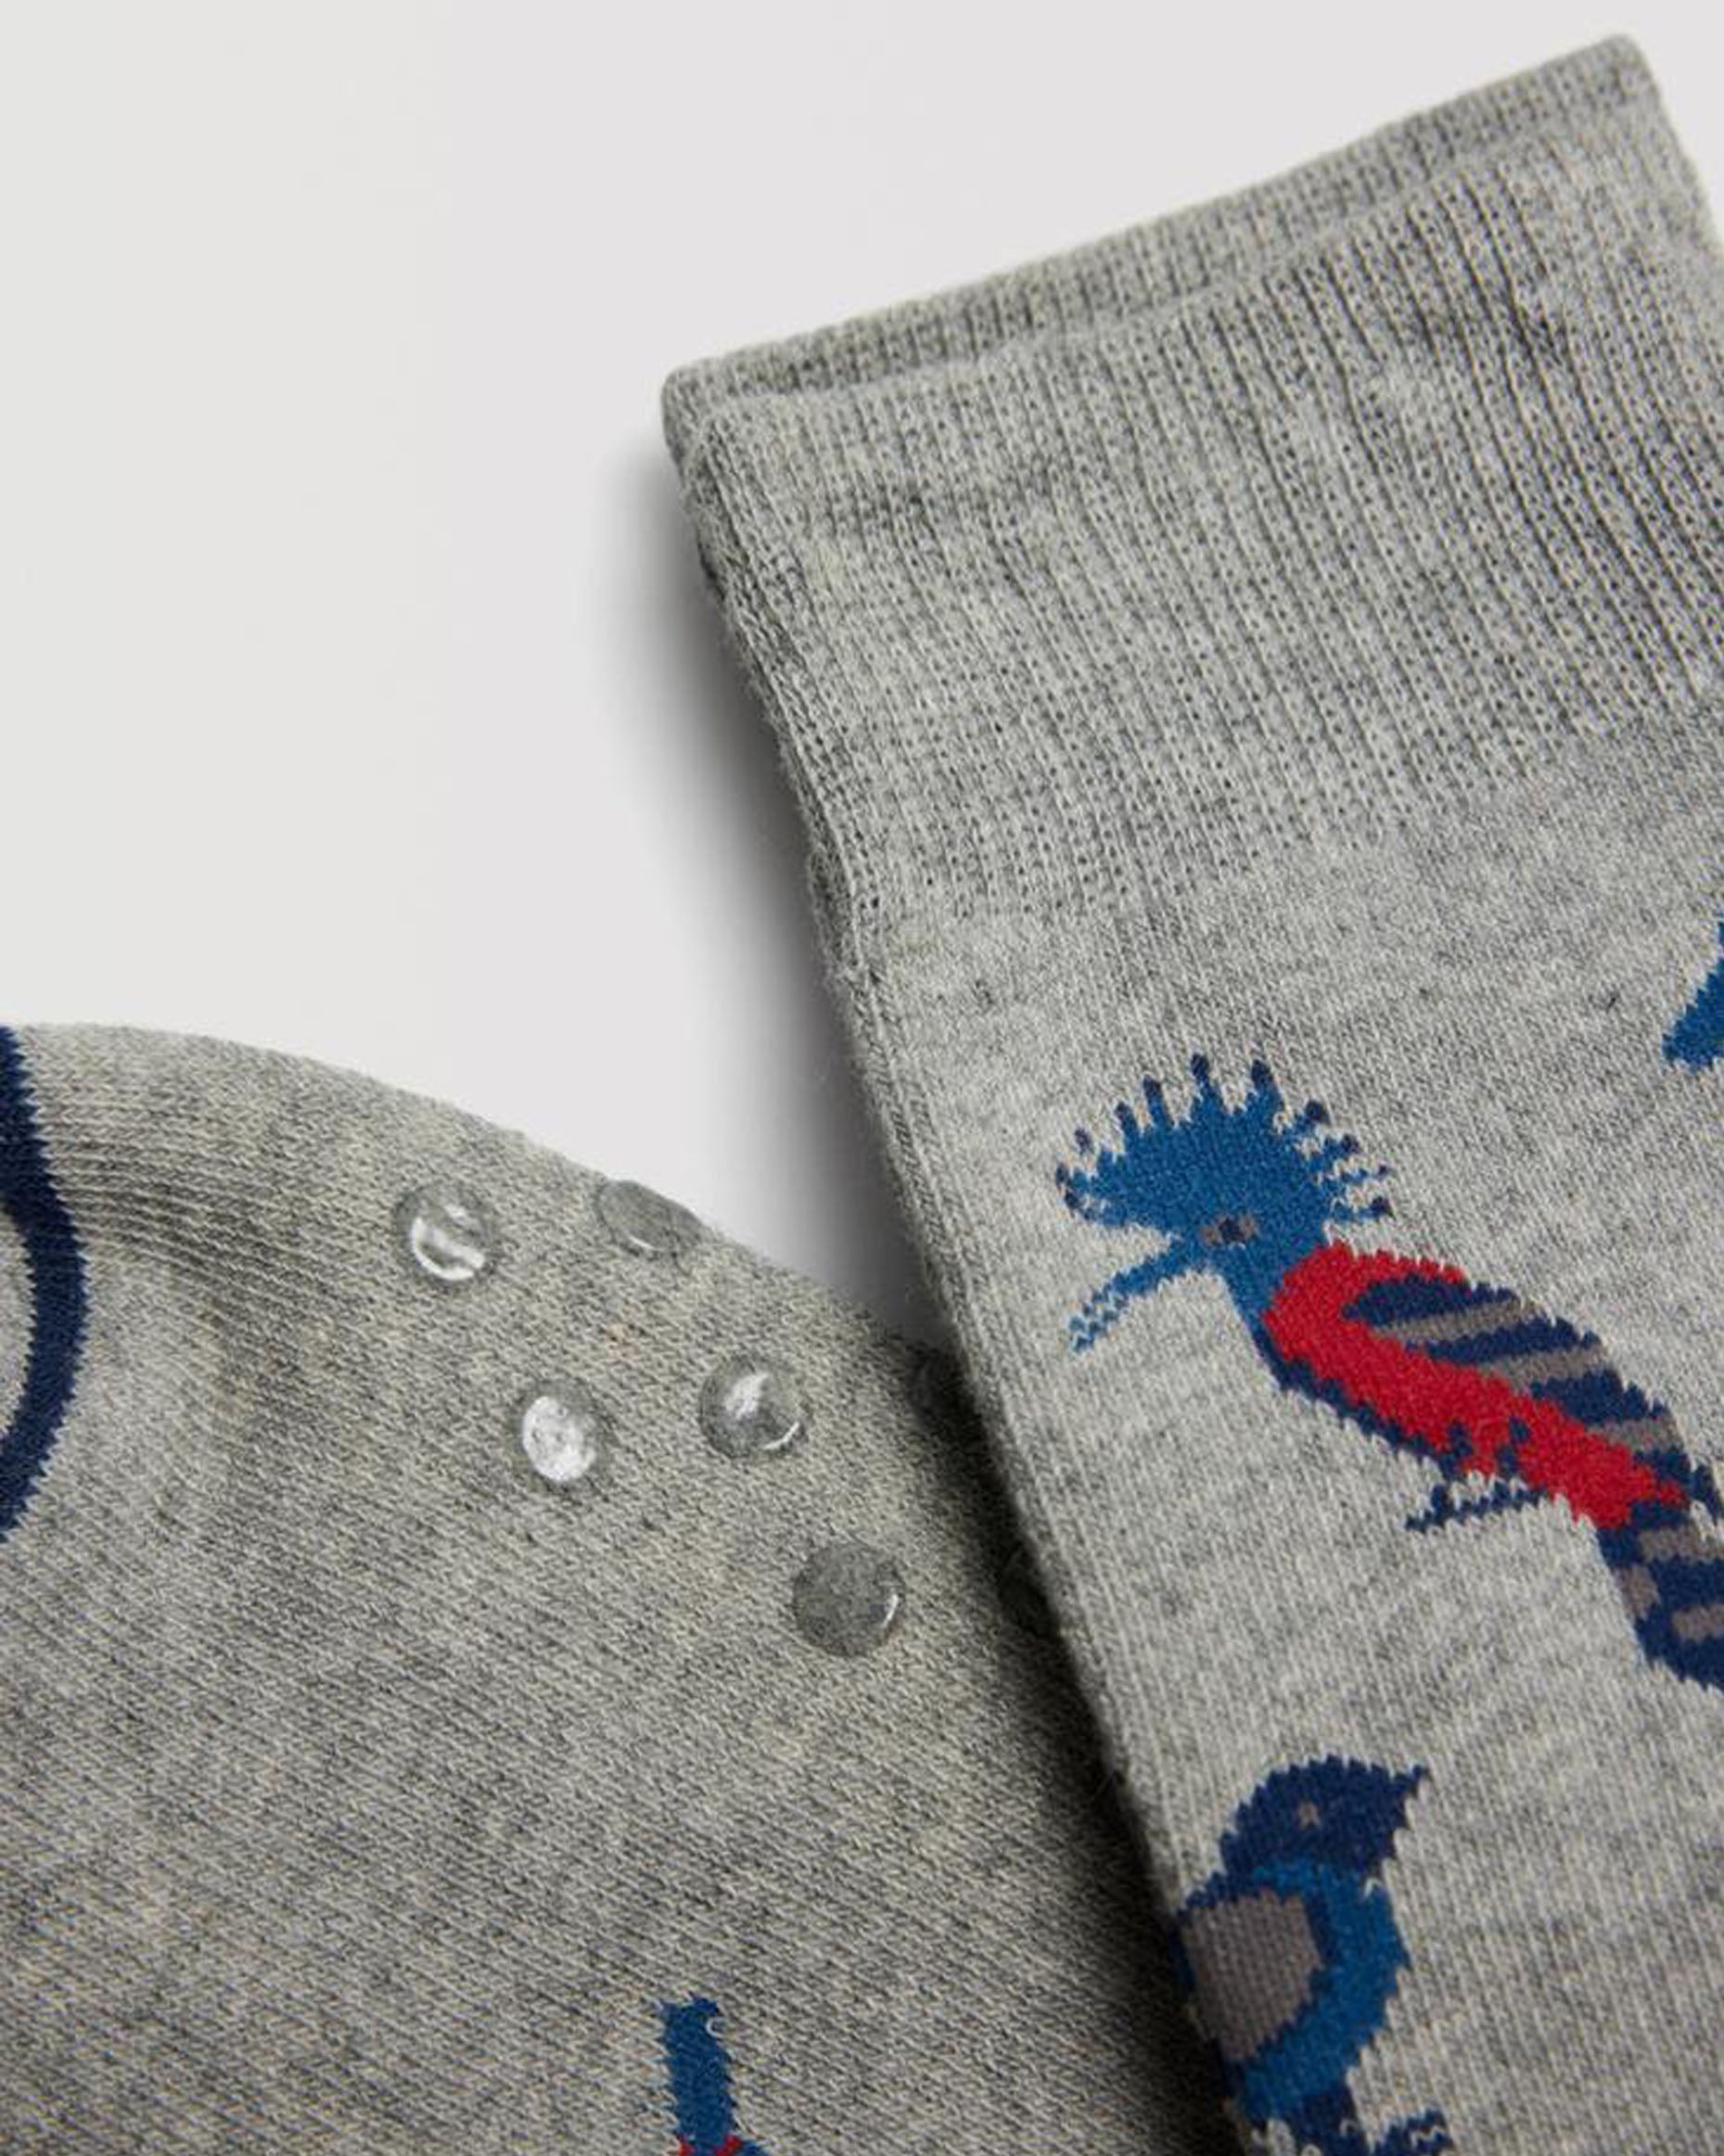 Ysabel Mora 22888 Bird Slipper Socks - Light grey thick and warm terry lined cotton mix crew length ankle socks with an all over exotic birds pattern in red, blue and navy, dotted non-slip sole and deep elasticated comfort cuff.